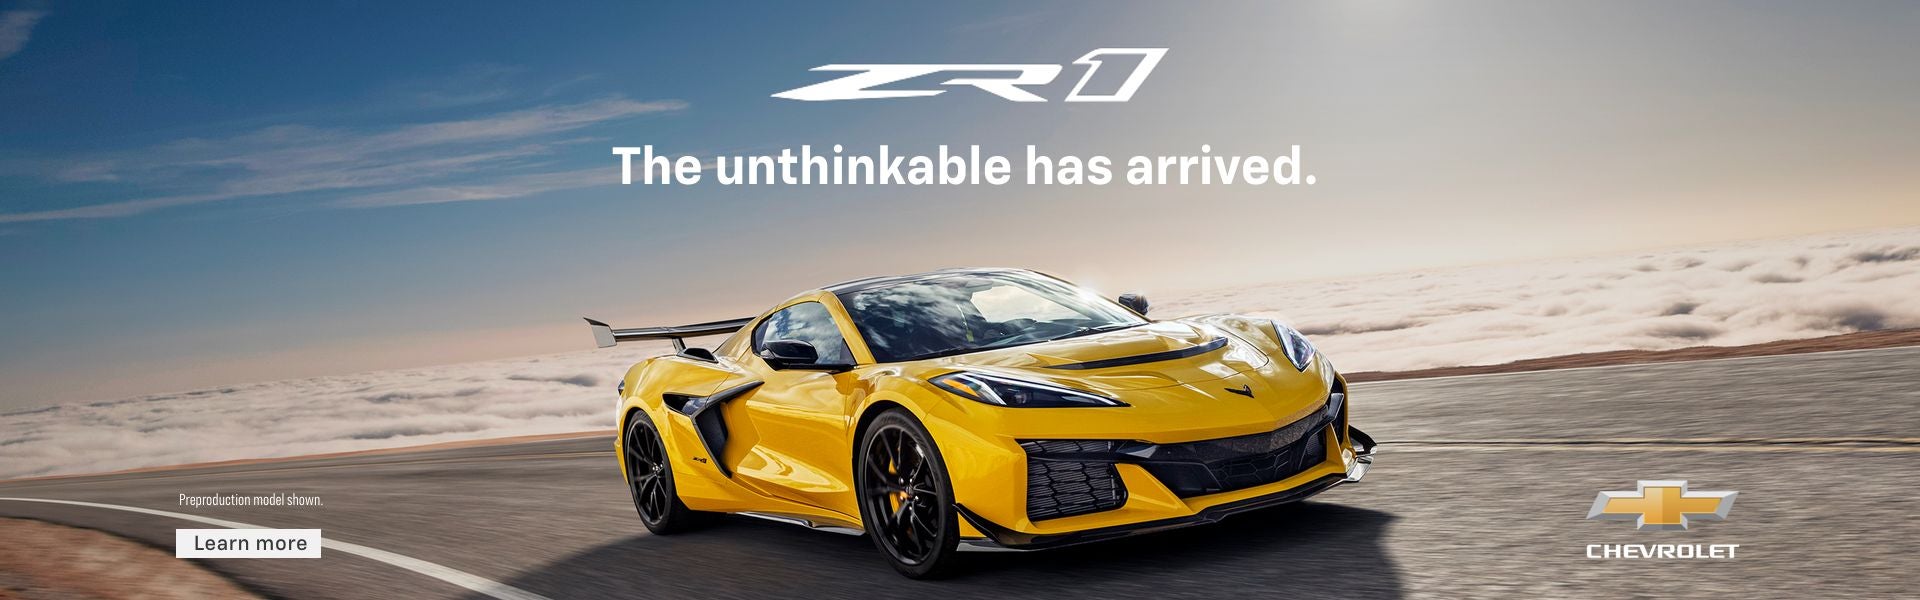 2025 CHEVY CORVETTE ZR1 The unthinkable has arrived.